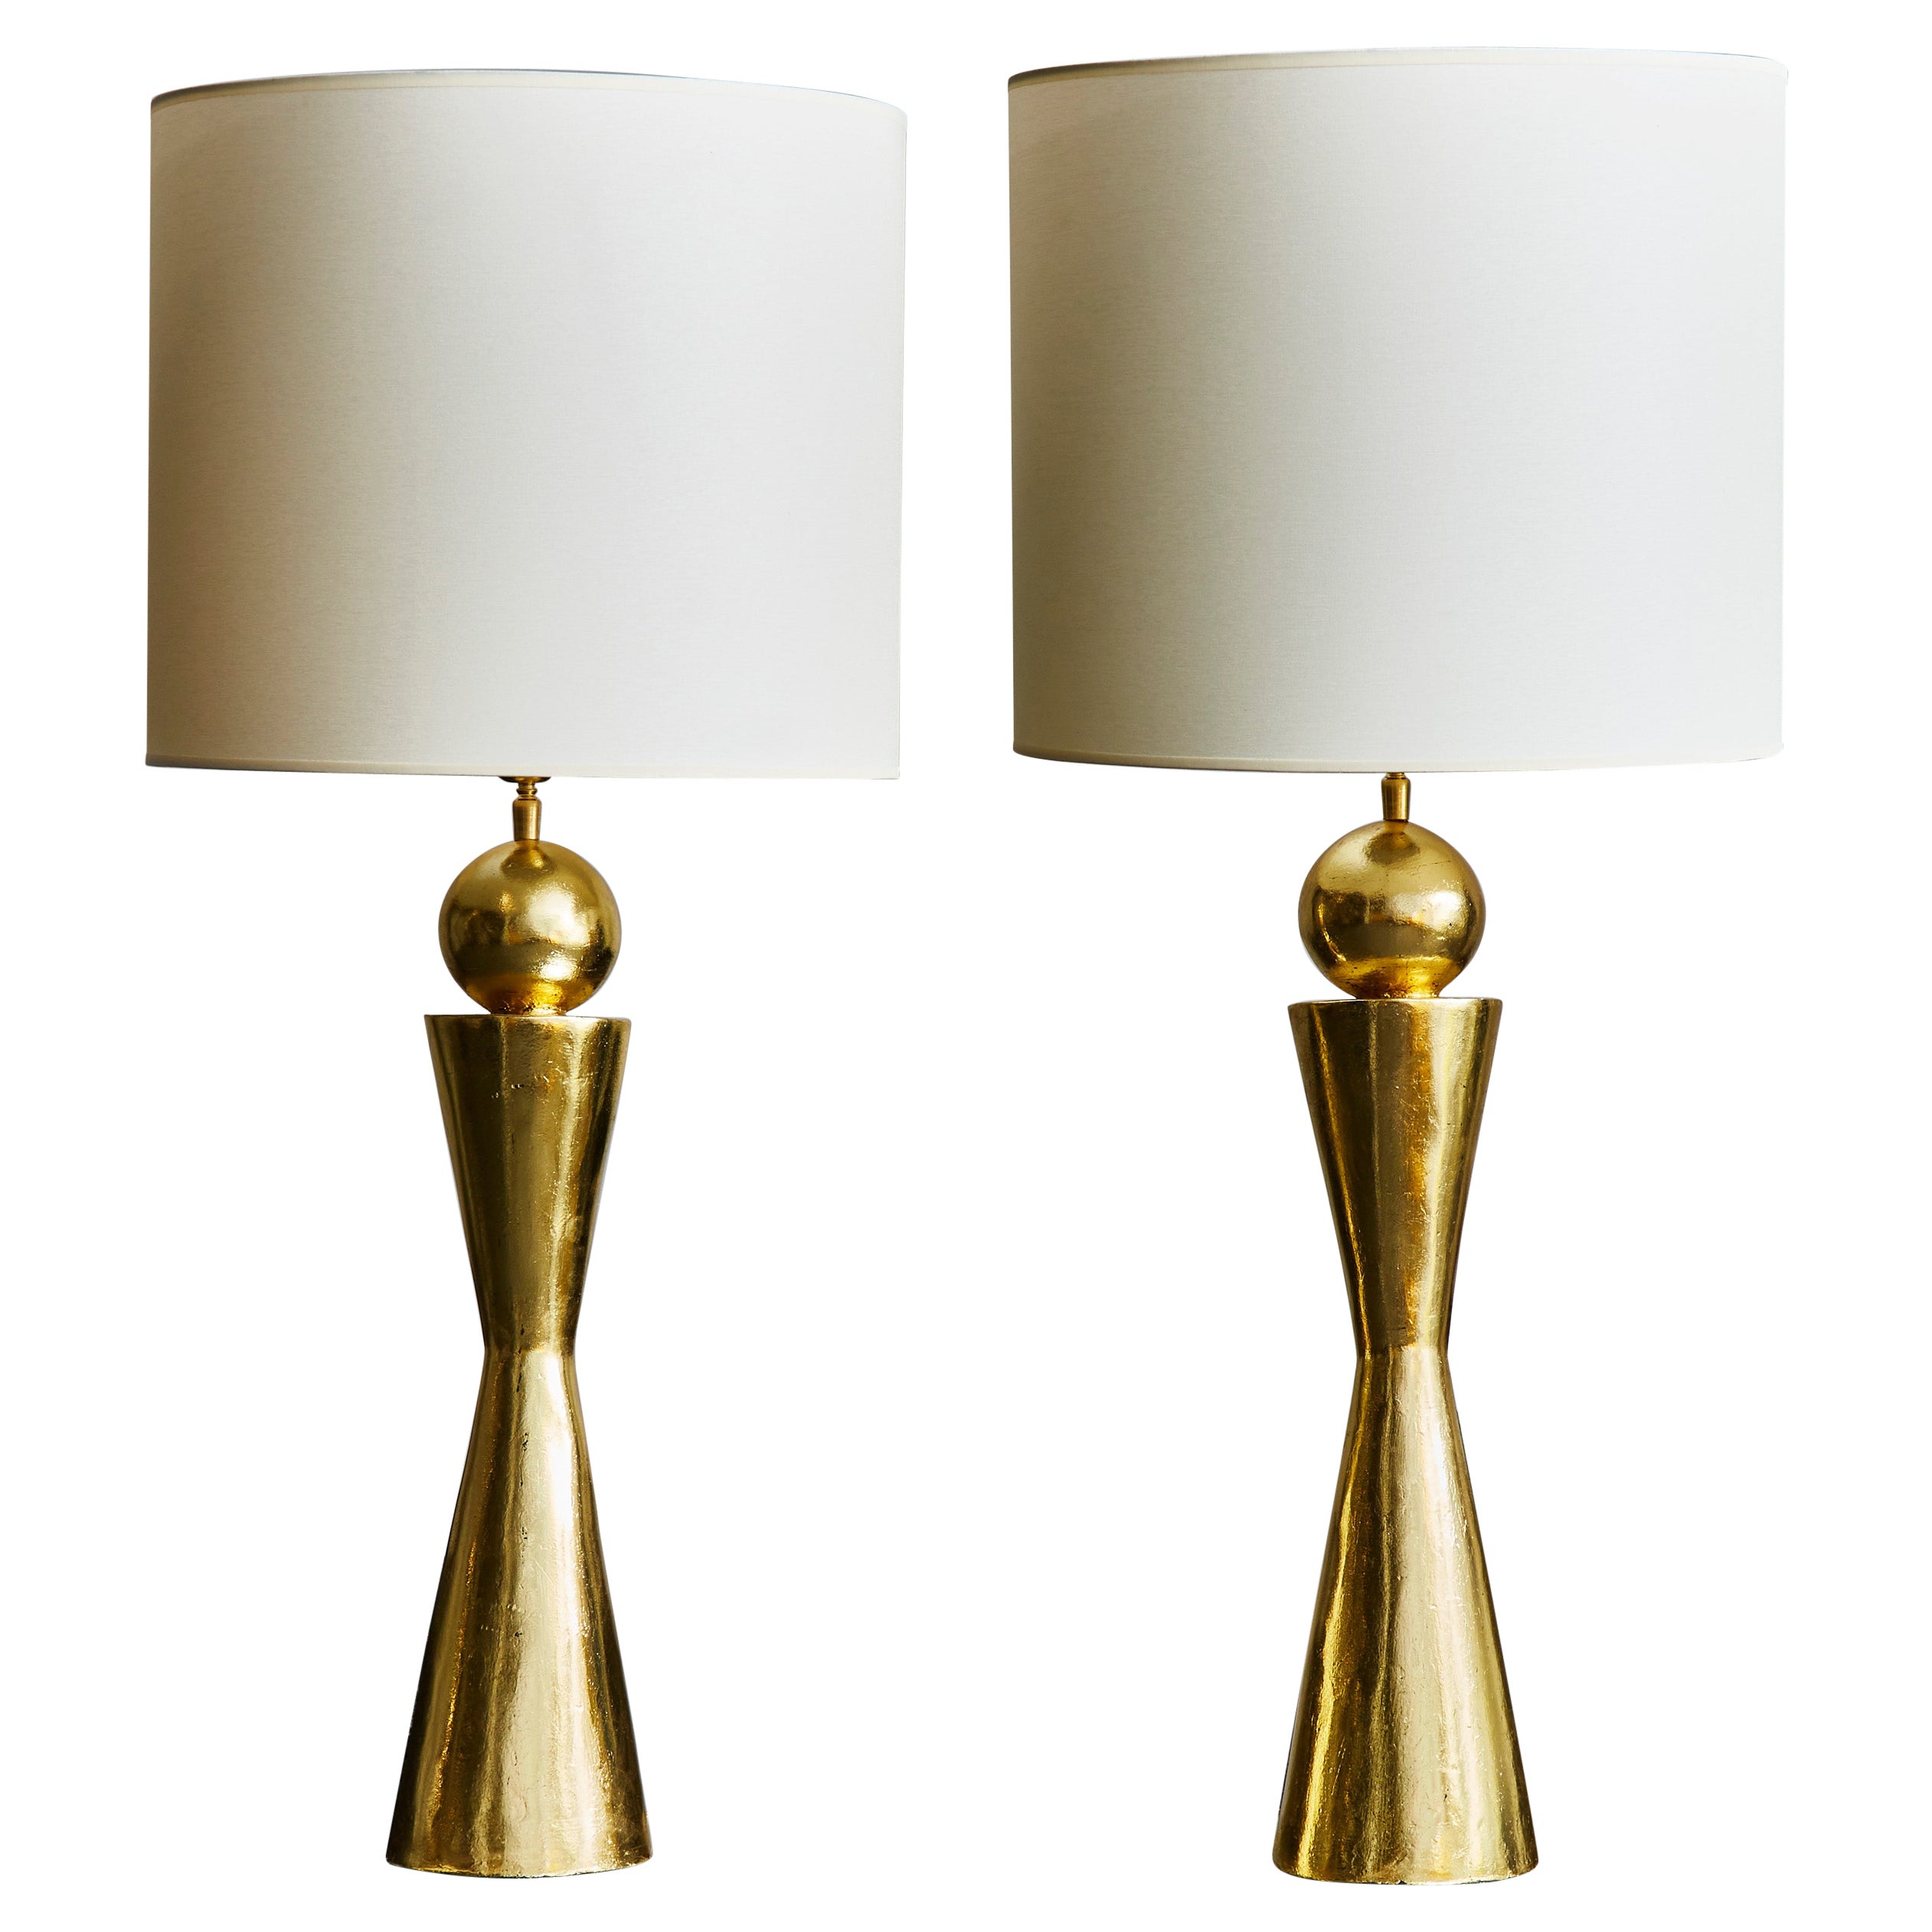 Pair of Gold Leaf Covered Plaster Table Lamps